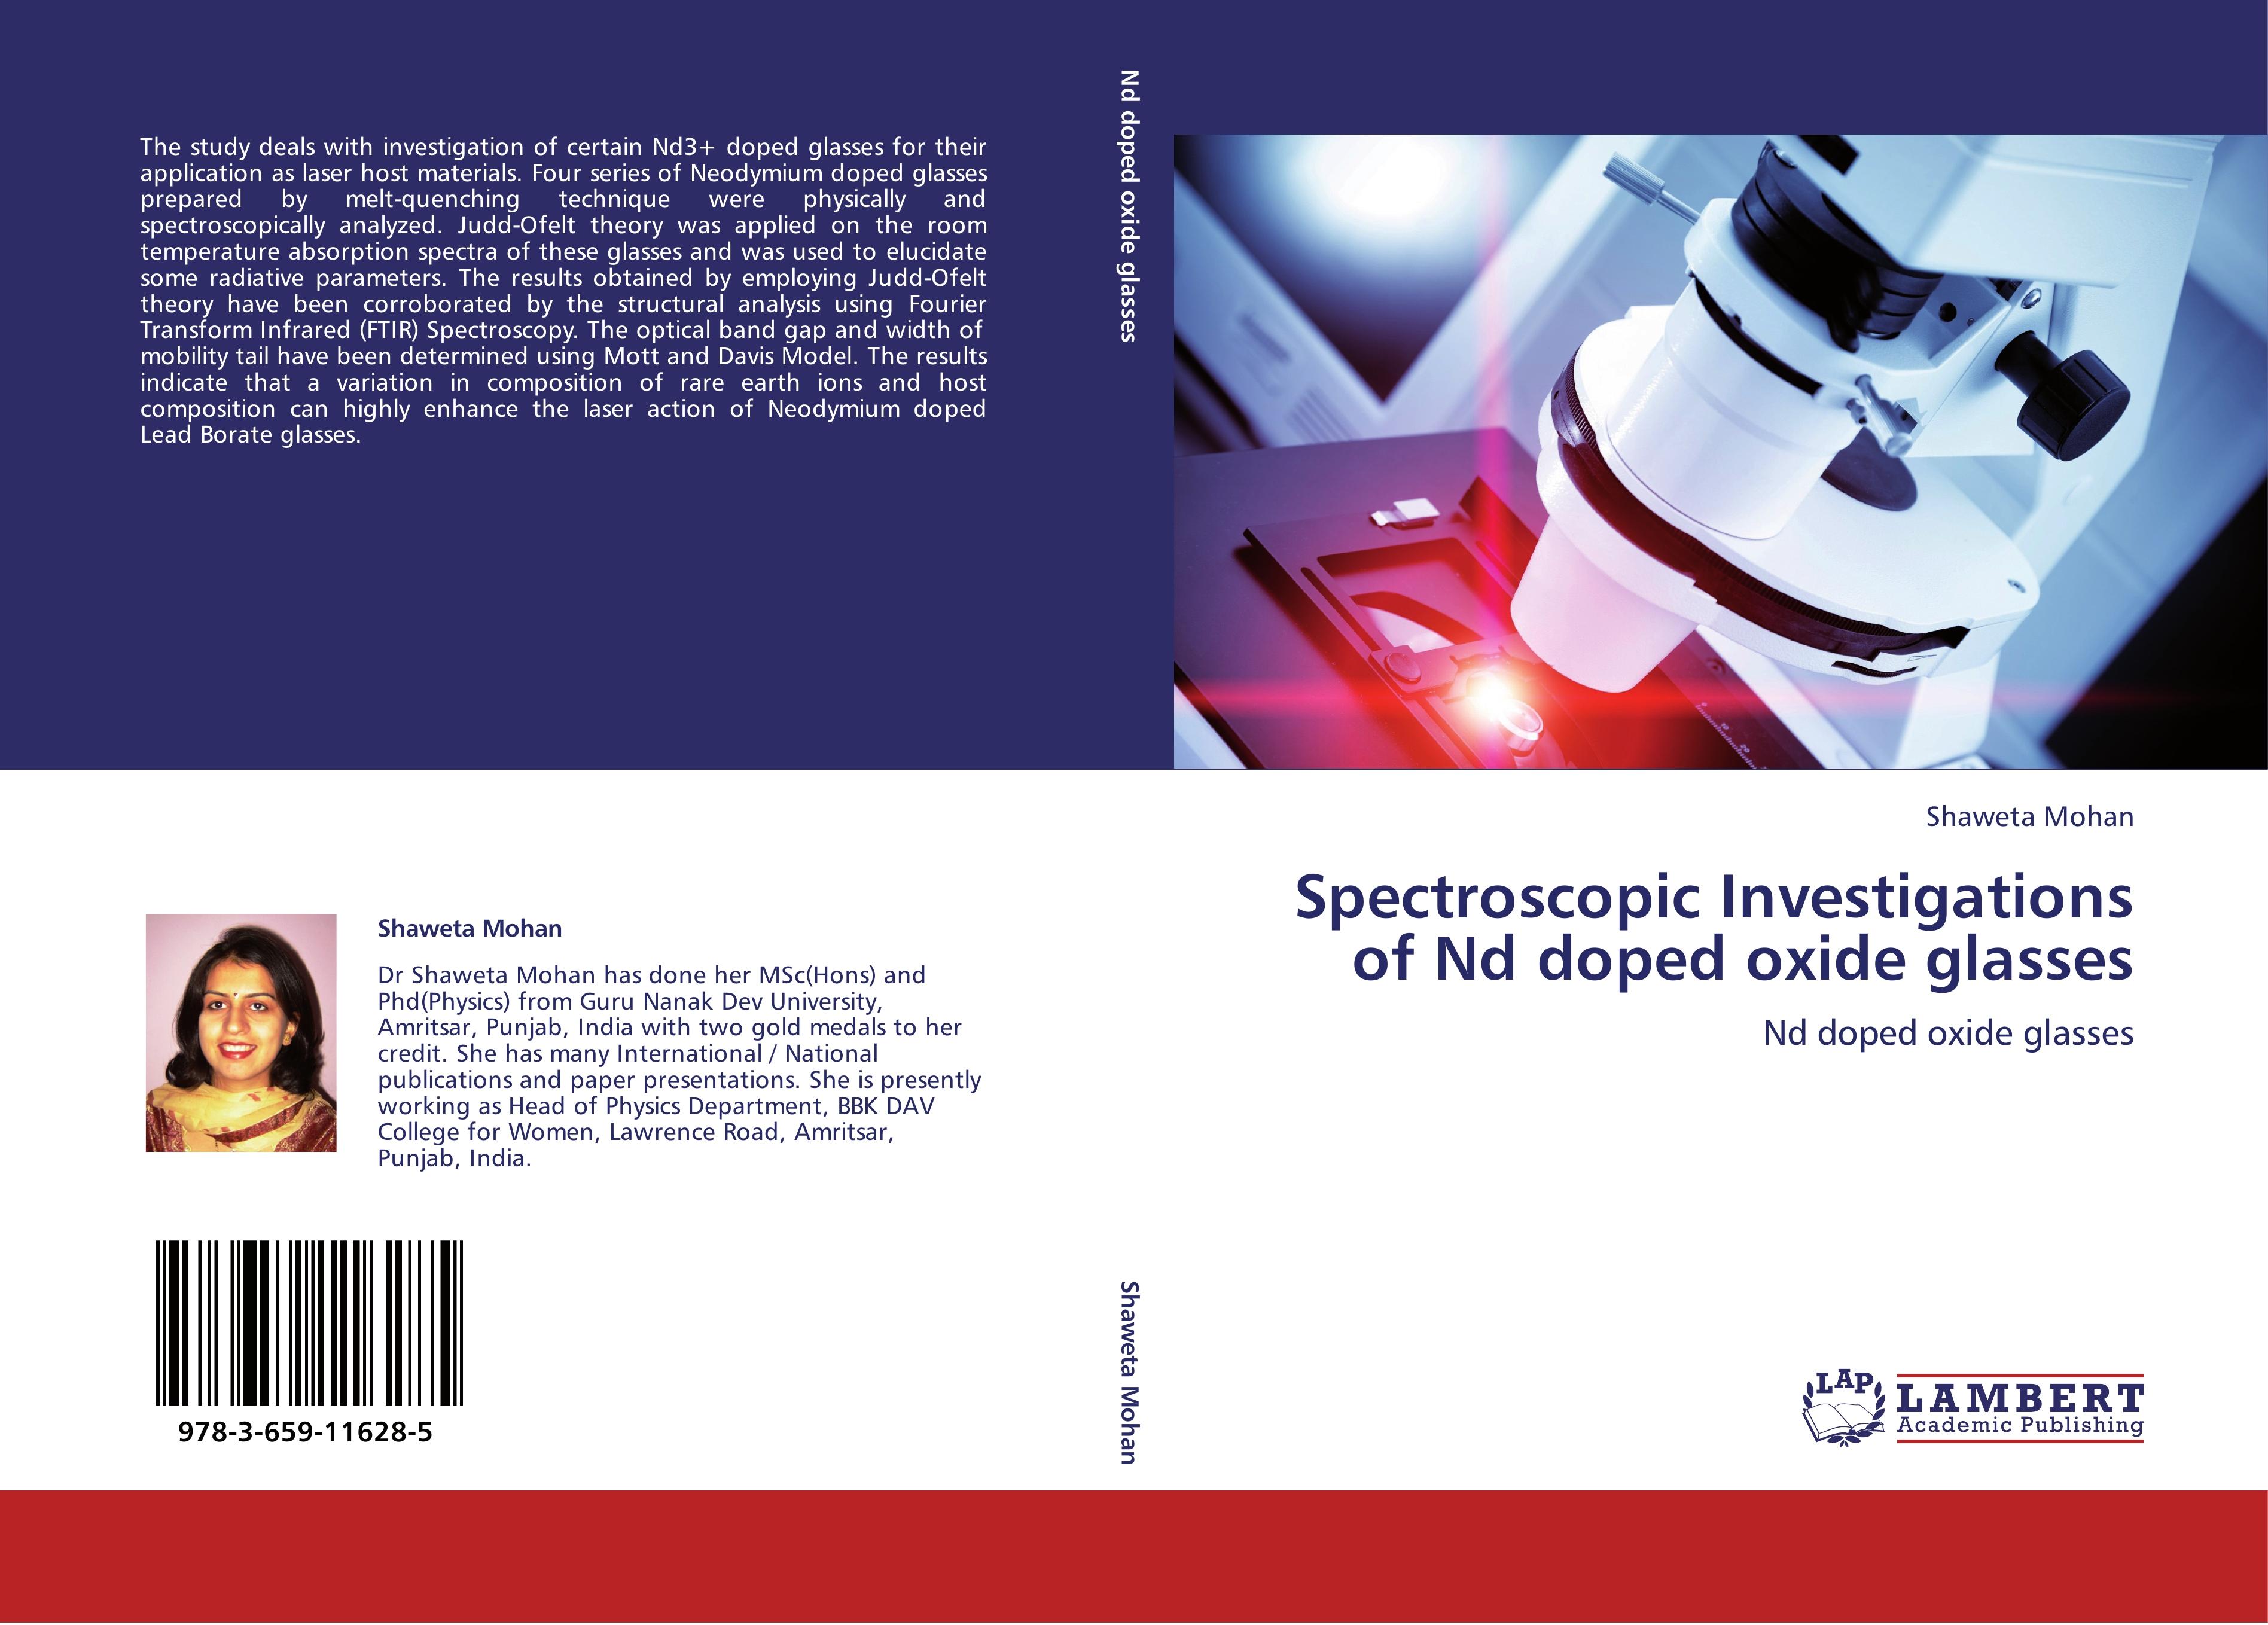 Spectroscopic Investigations of Nd doped oxide glasses / Nd doped oxide glasses / Shaweta Mohan / Taschenbuch / Paperback / 184 S. / Englisch / 2012 / LAP LAMBERT Academic Publishing - Mohan, Shaweta